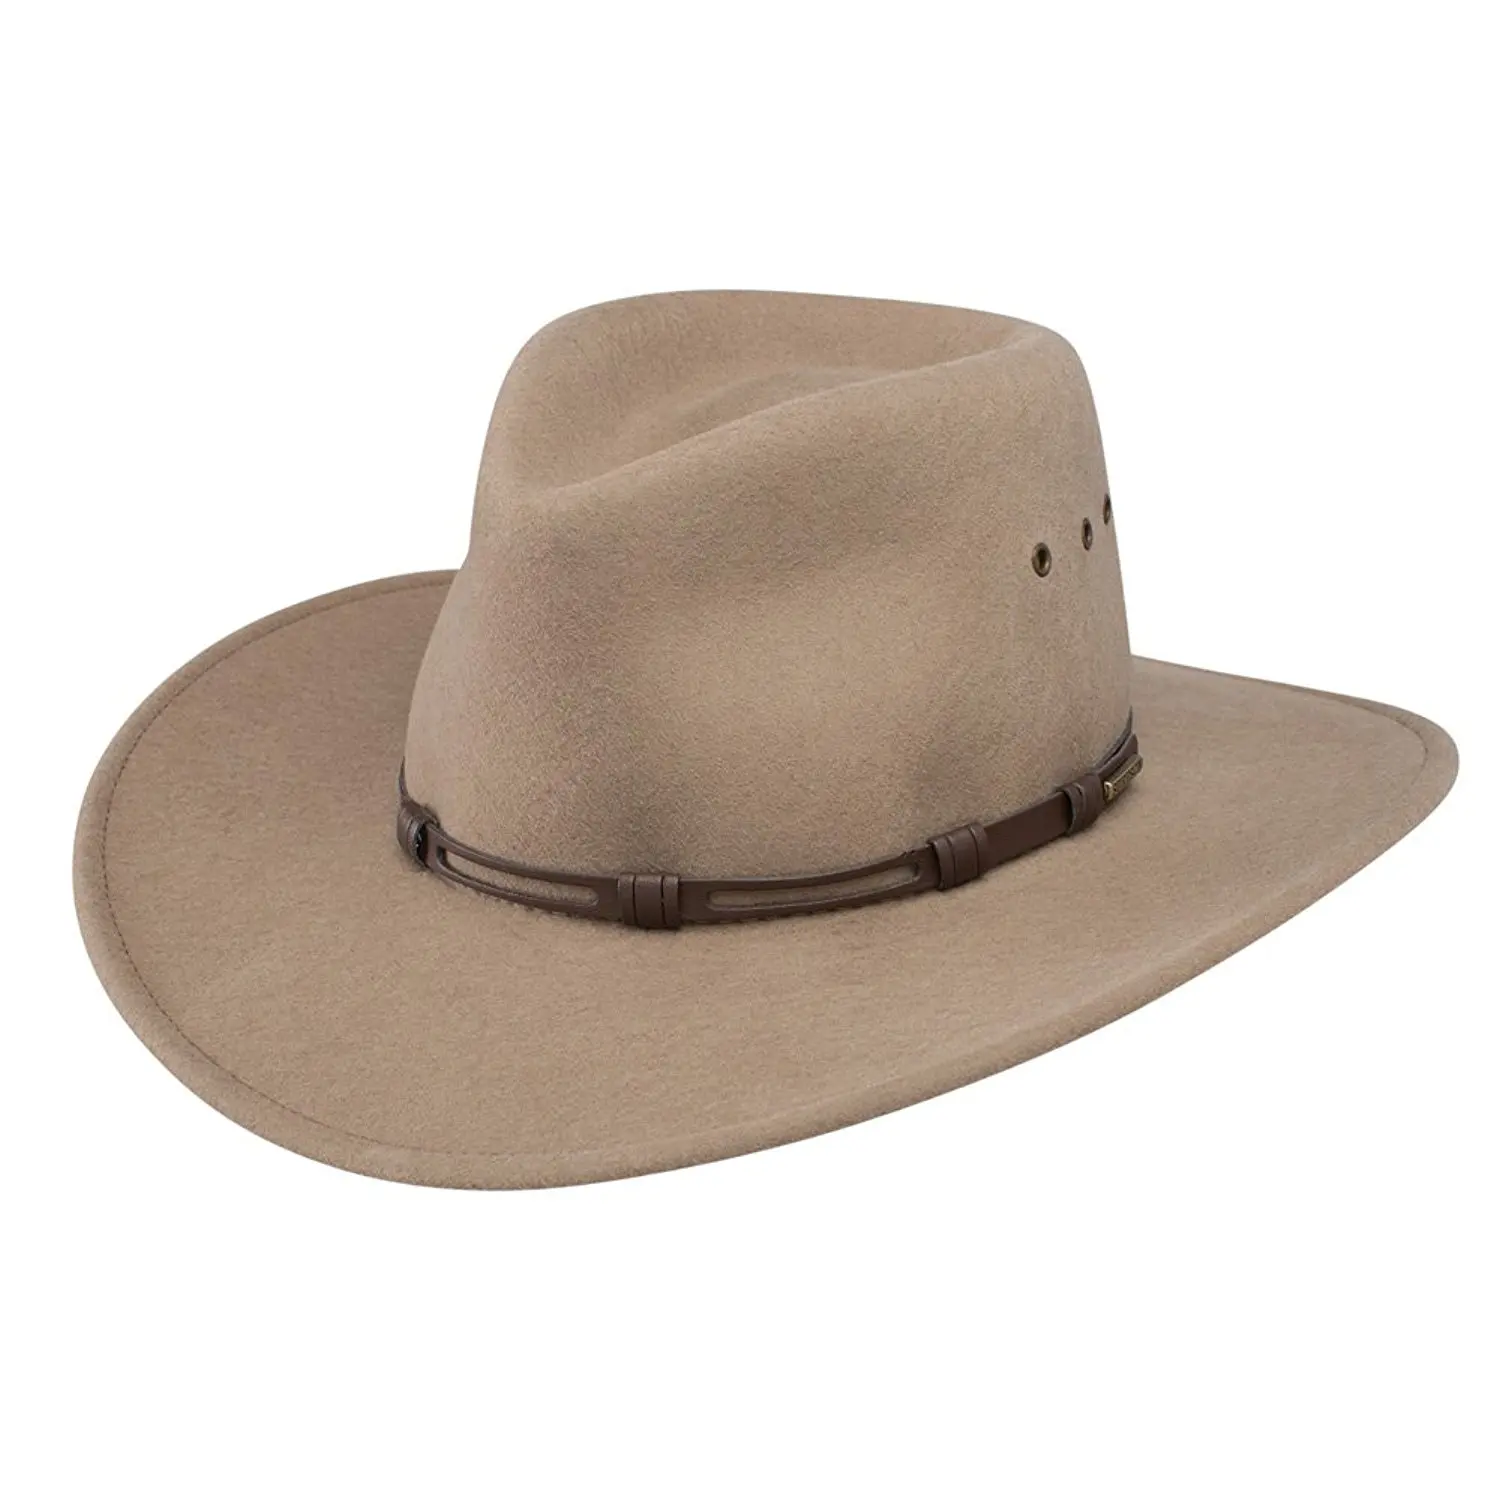 Stetson Crushable Outdoor Hat- The Chandler - Water Repellent - Size Large....